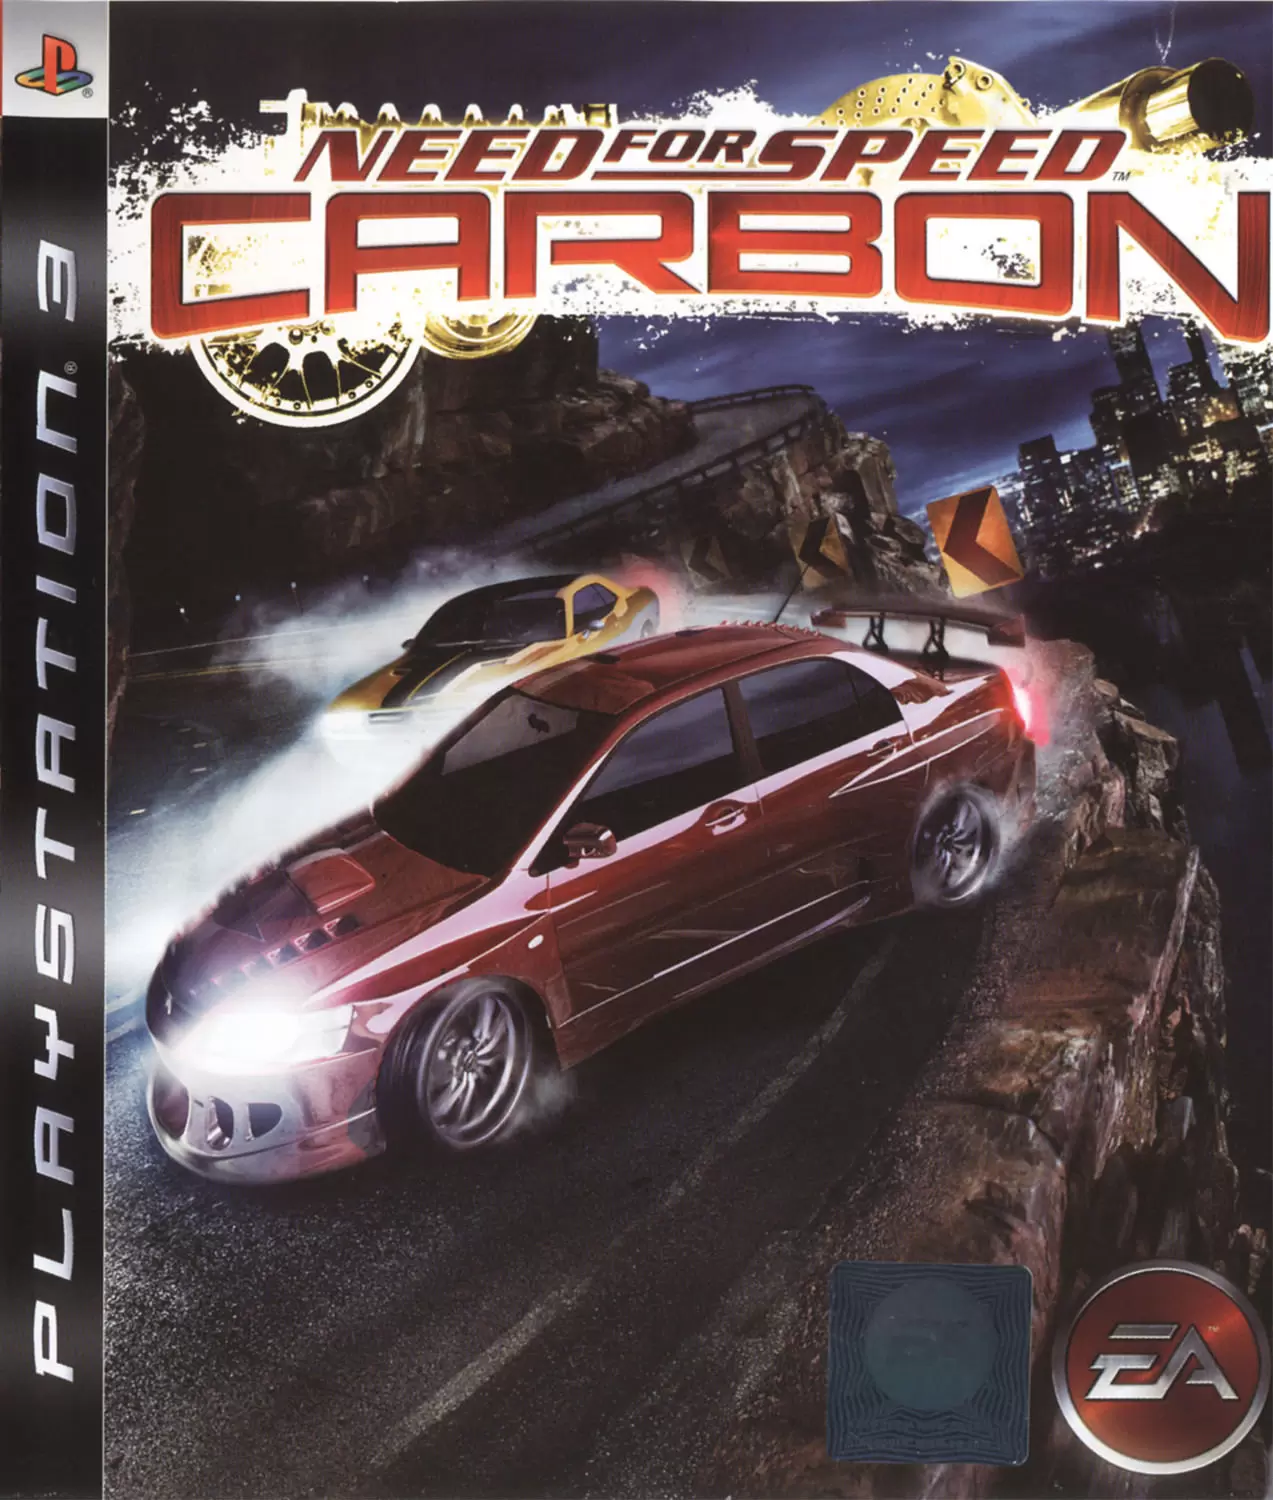 PS3 Games - Need for Speed: Carbon